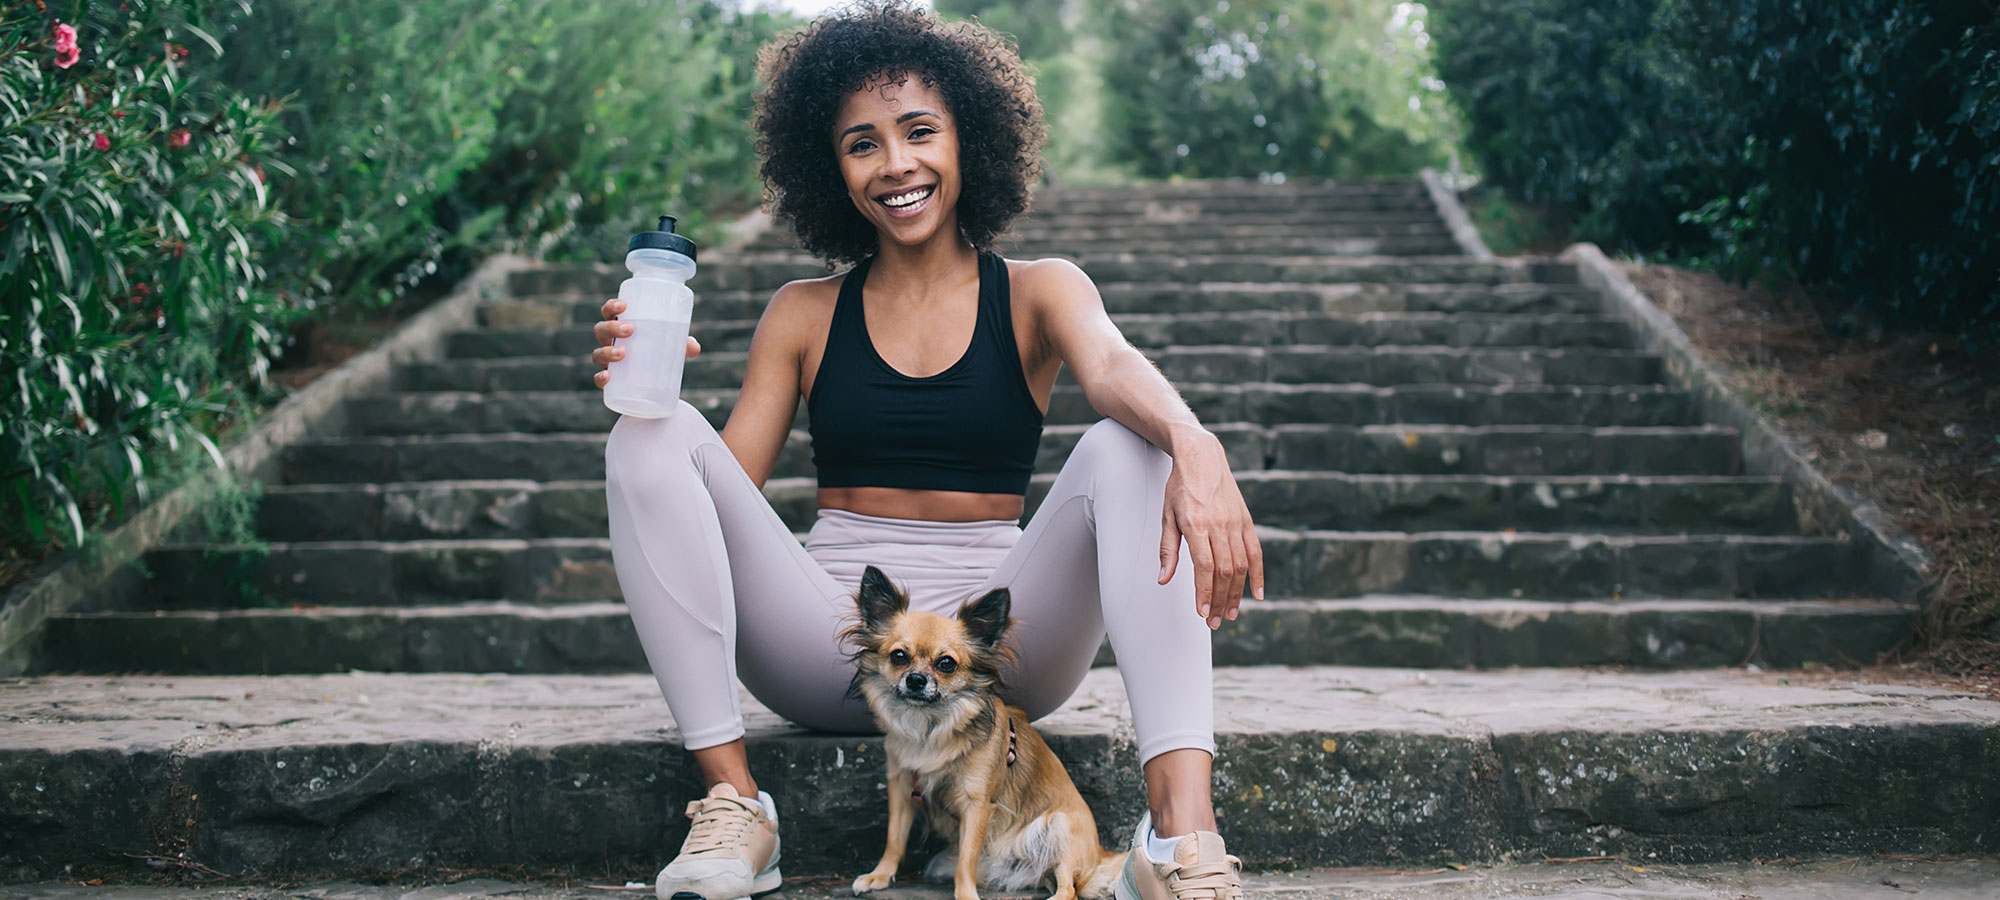 Woman sitting on concrete stairs with dog holding water bottle and smiling